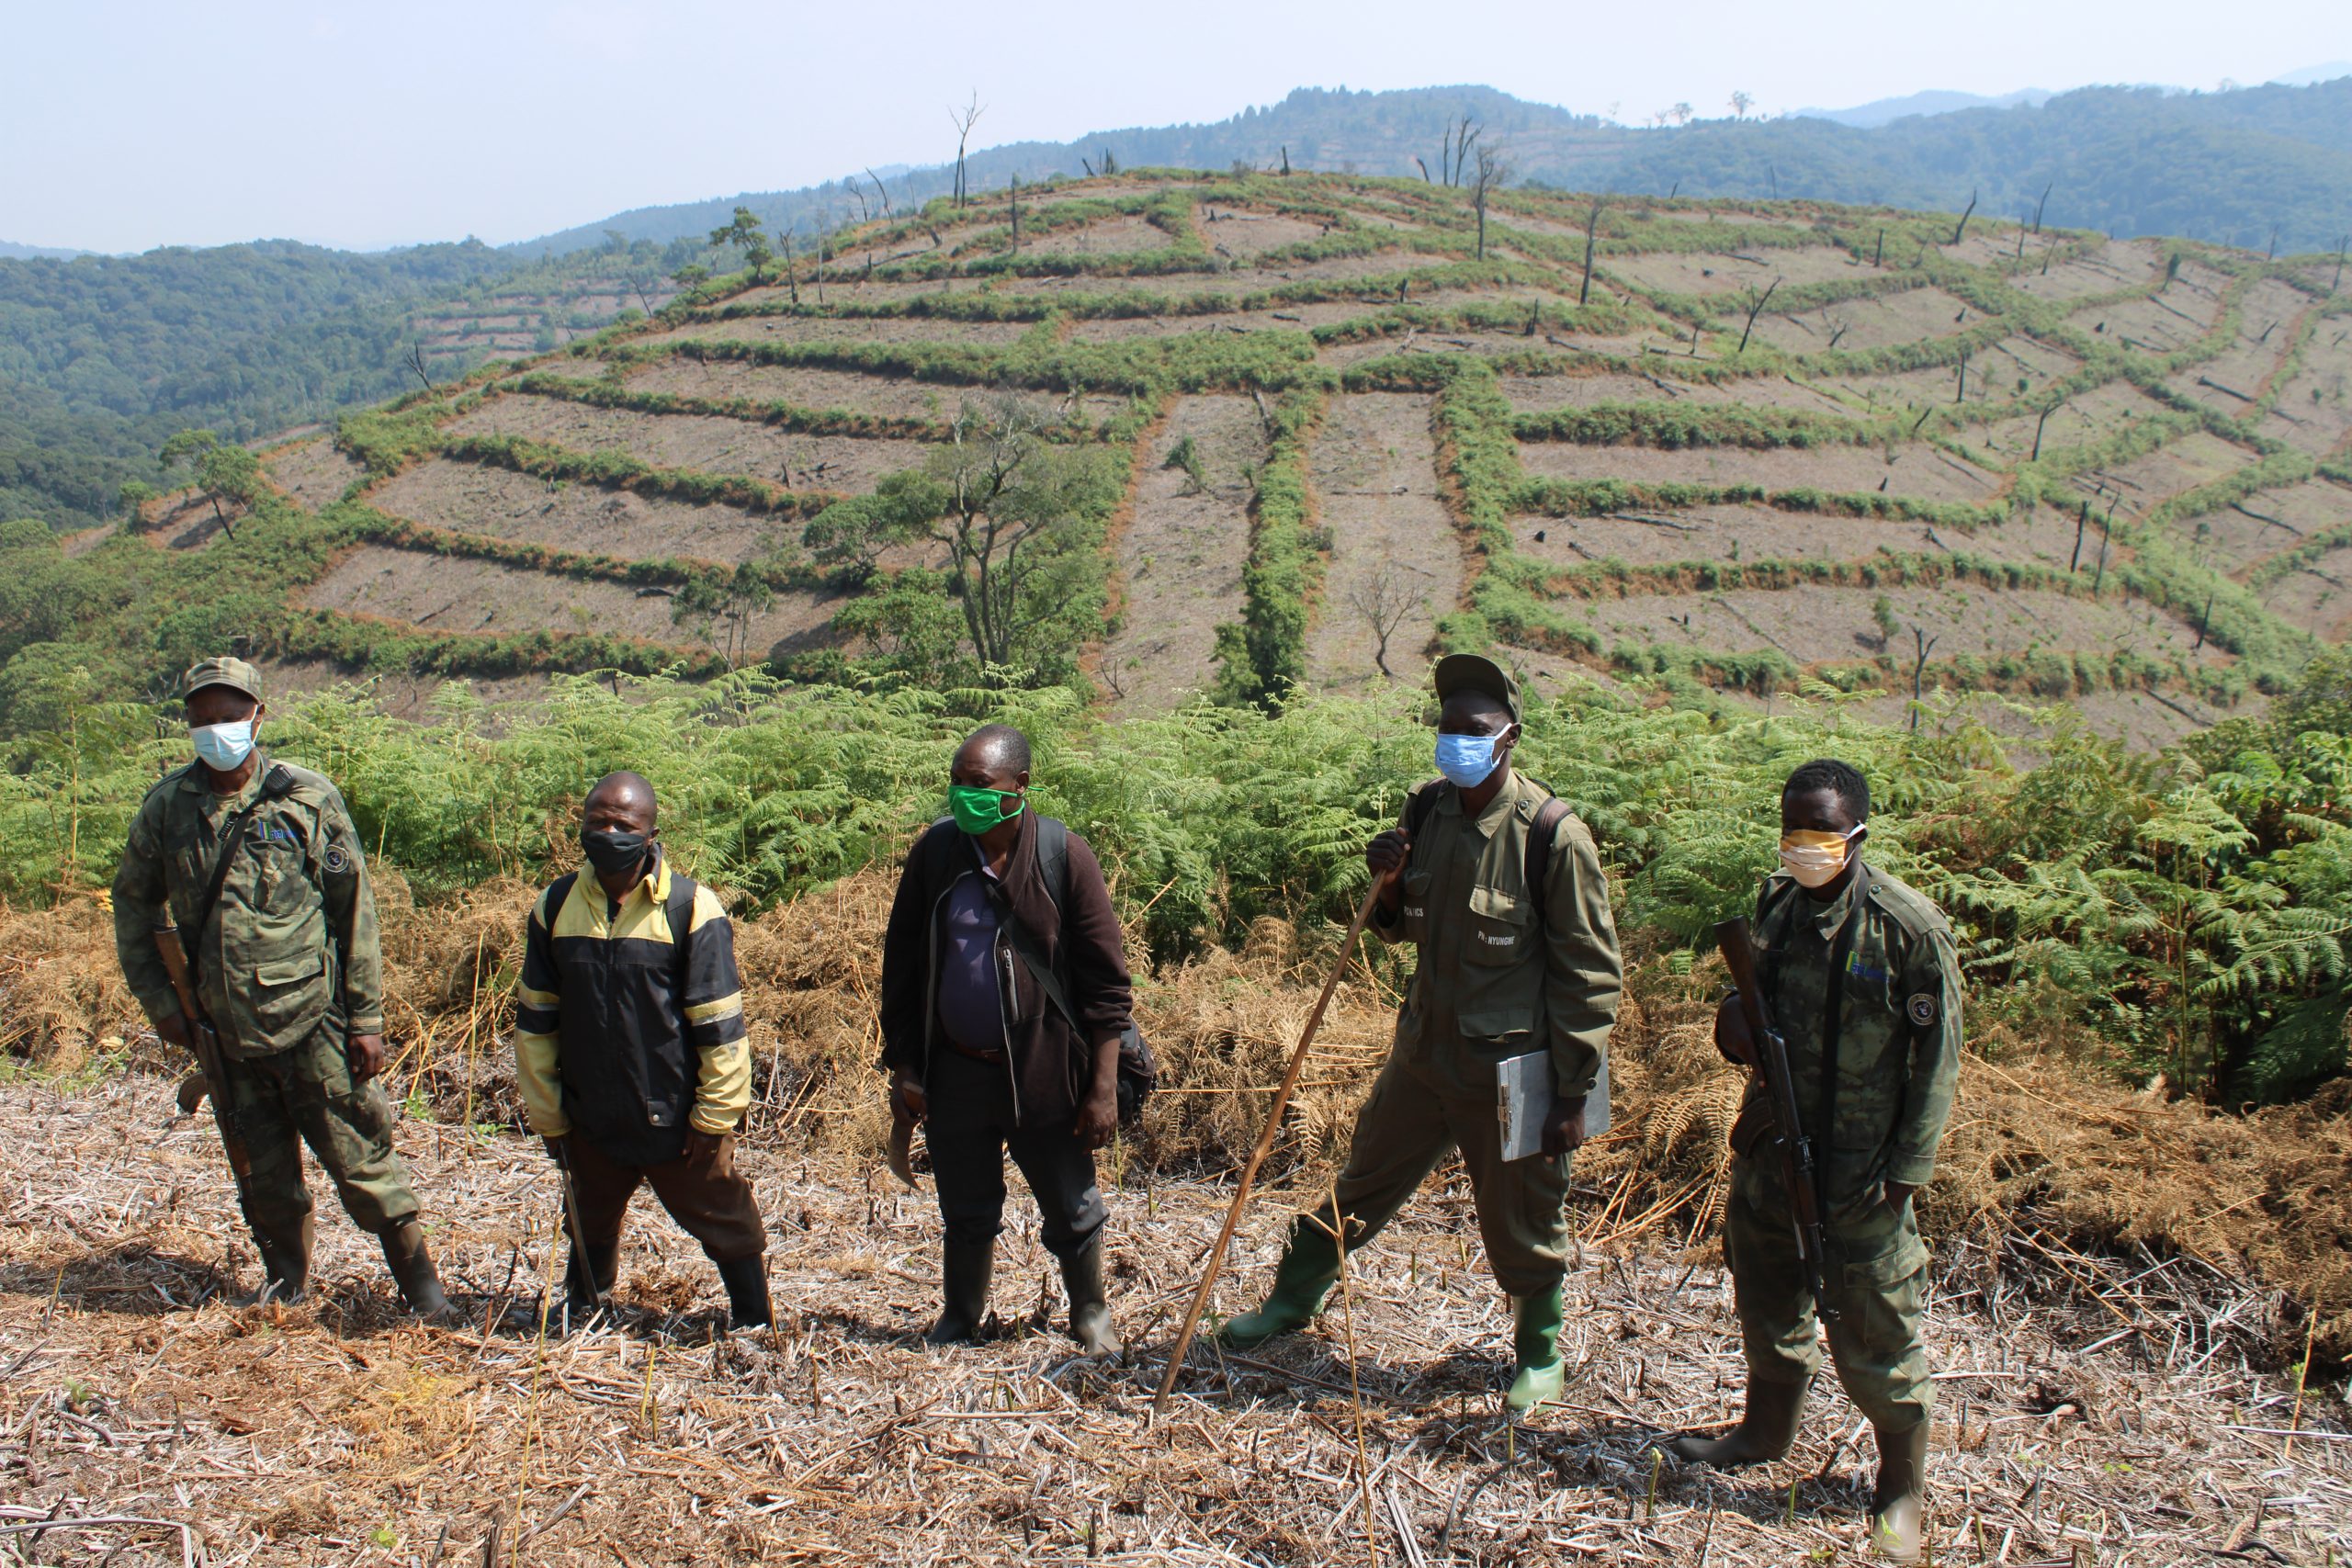 Team of forest restoration workers in the field